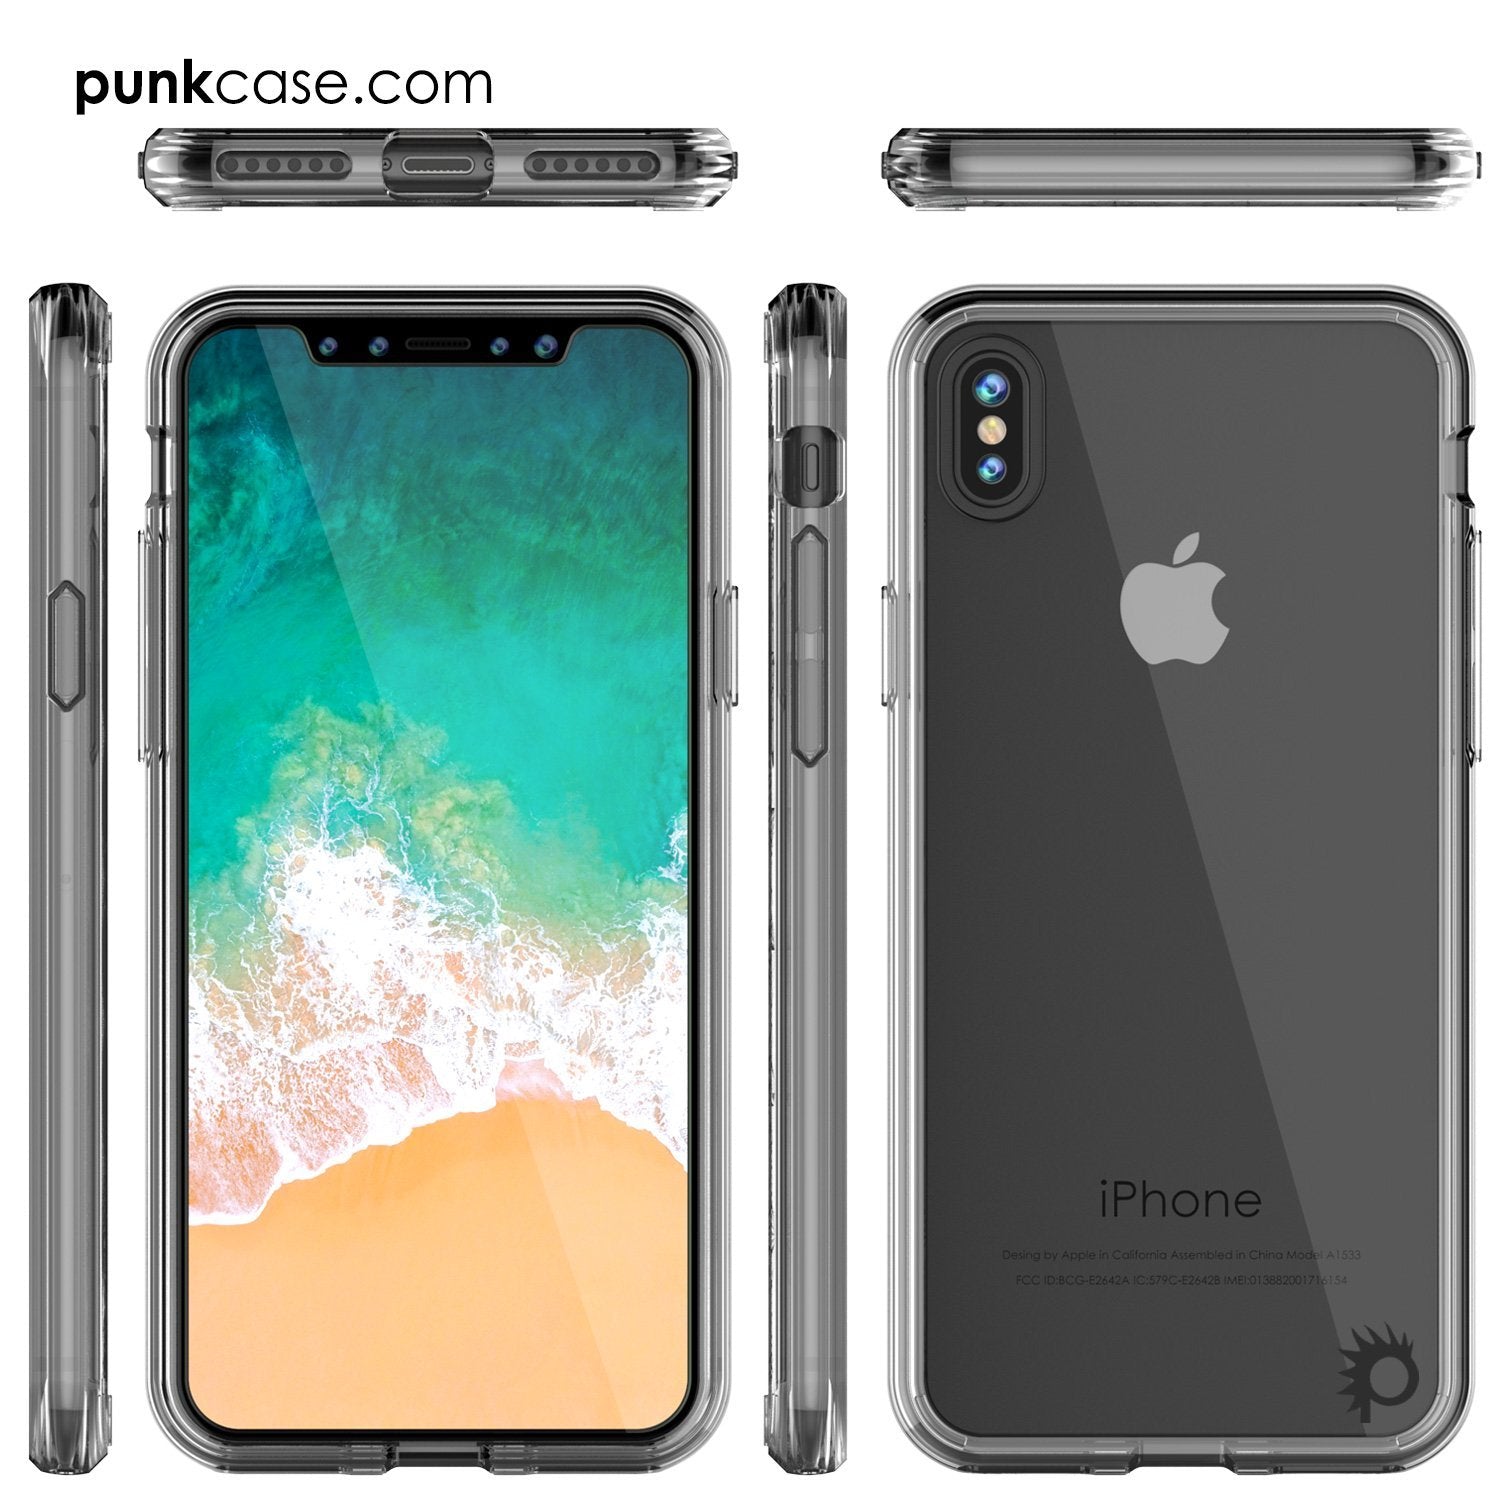 iPhone X Punkcase, [LUCID 2.0 Series] Slim Fit Dual Layer Cover, Clear